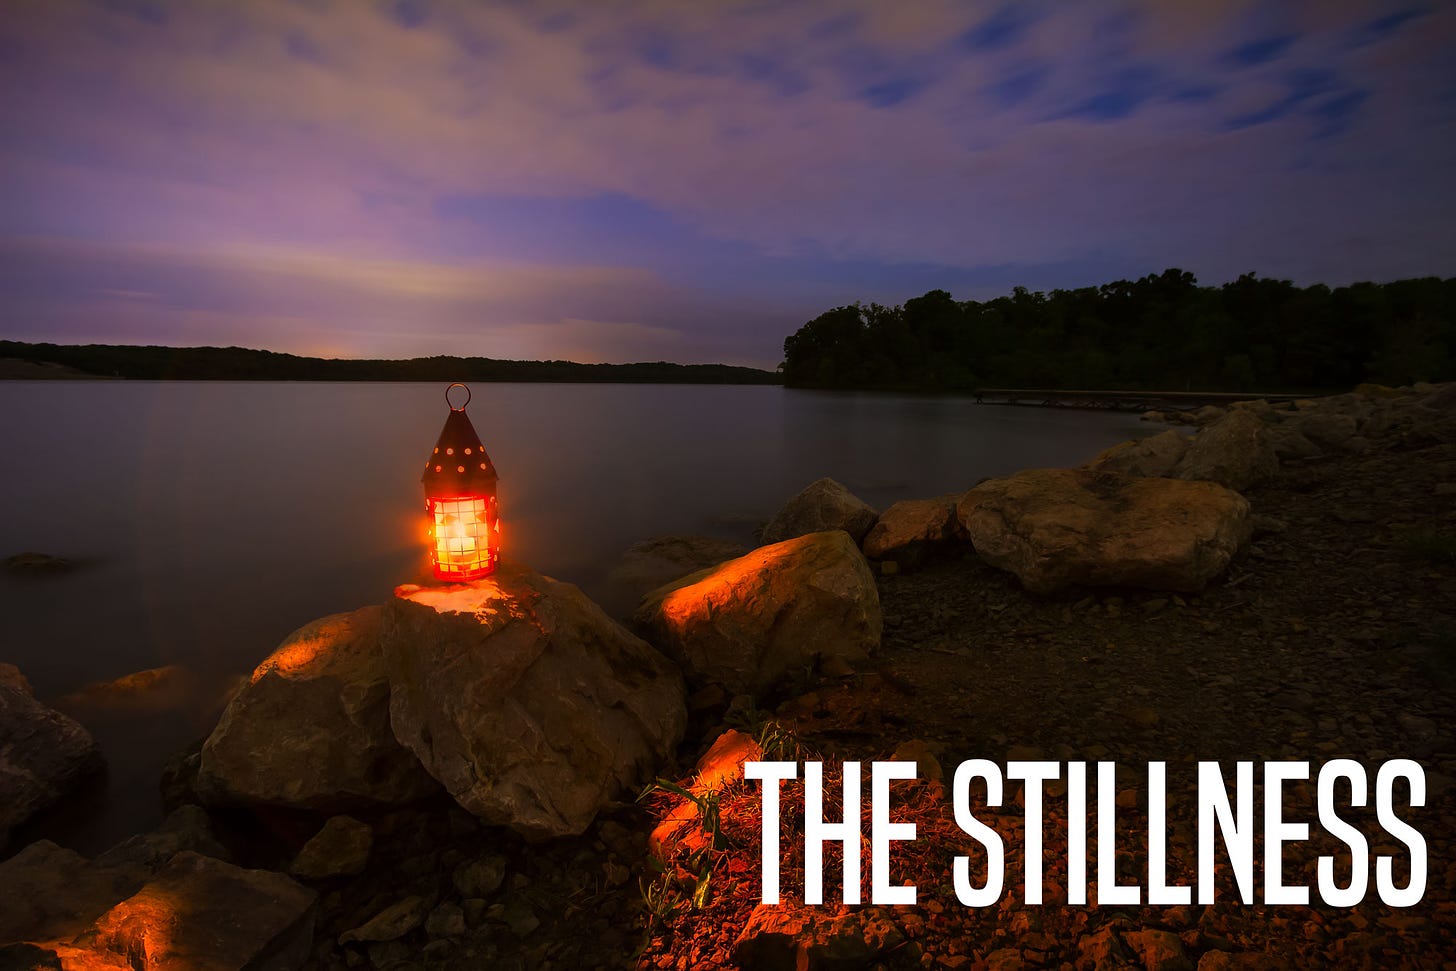 A photo of a rocky coast at sunset with a lone torch illuminating the foreground. The text "The Stillness" written in white.